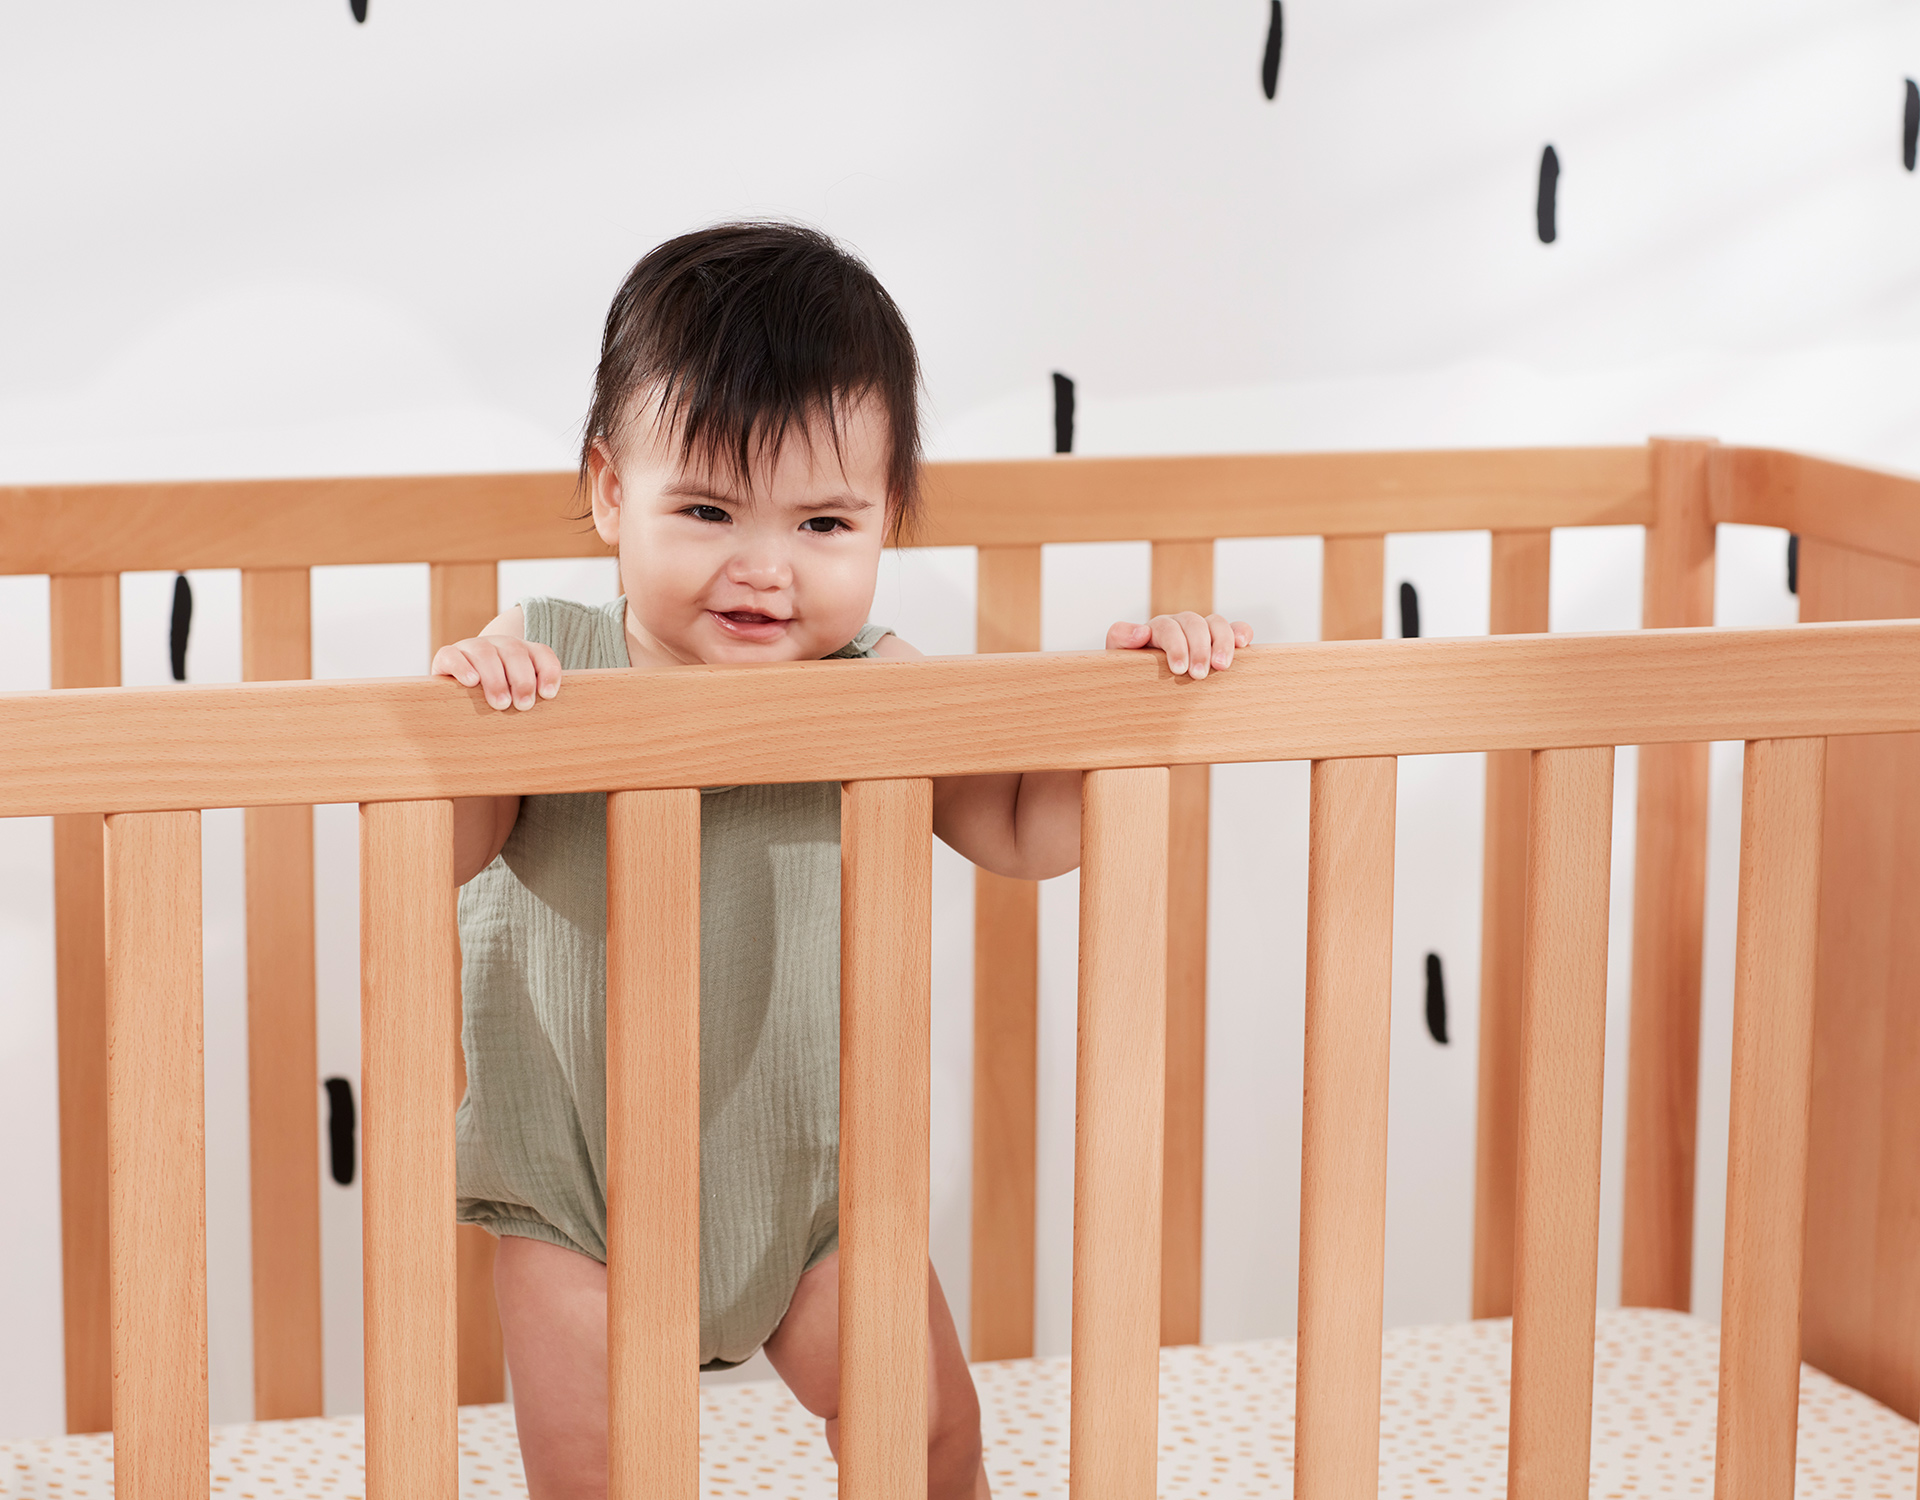 A baby stands up smiling in her cot, highlighting the importance of cot safety